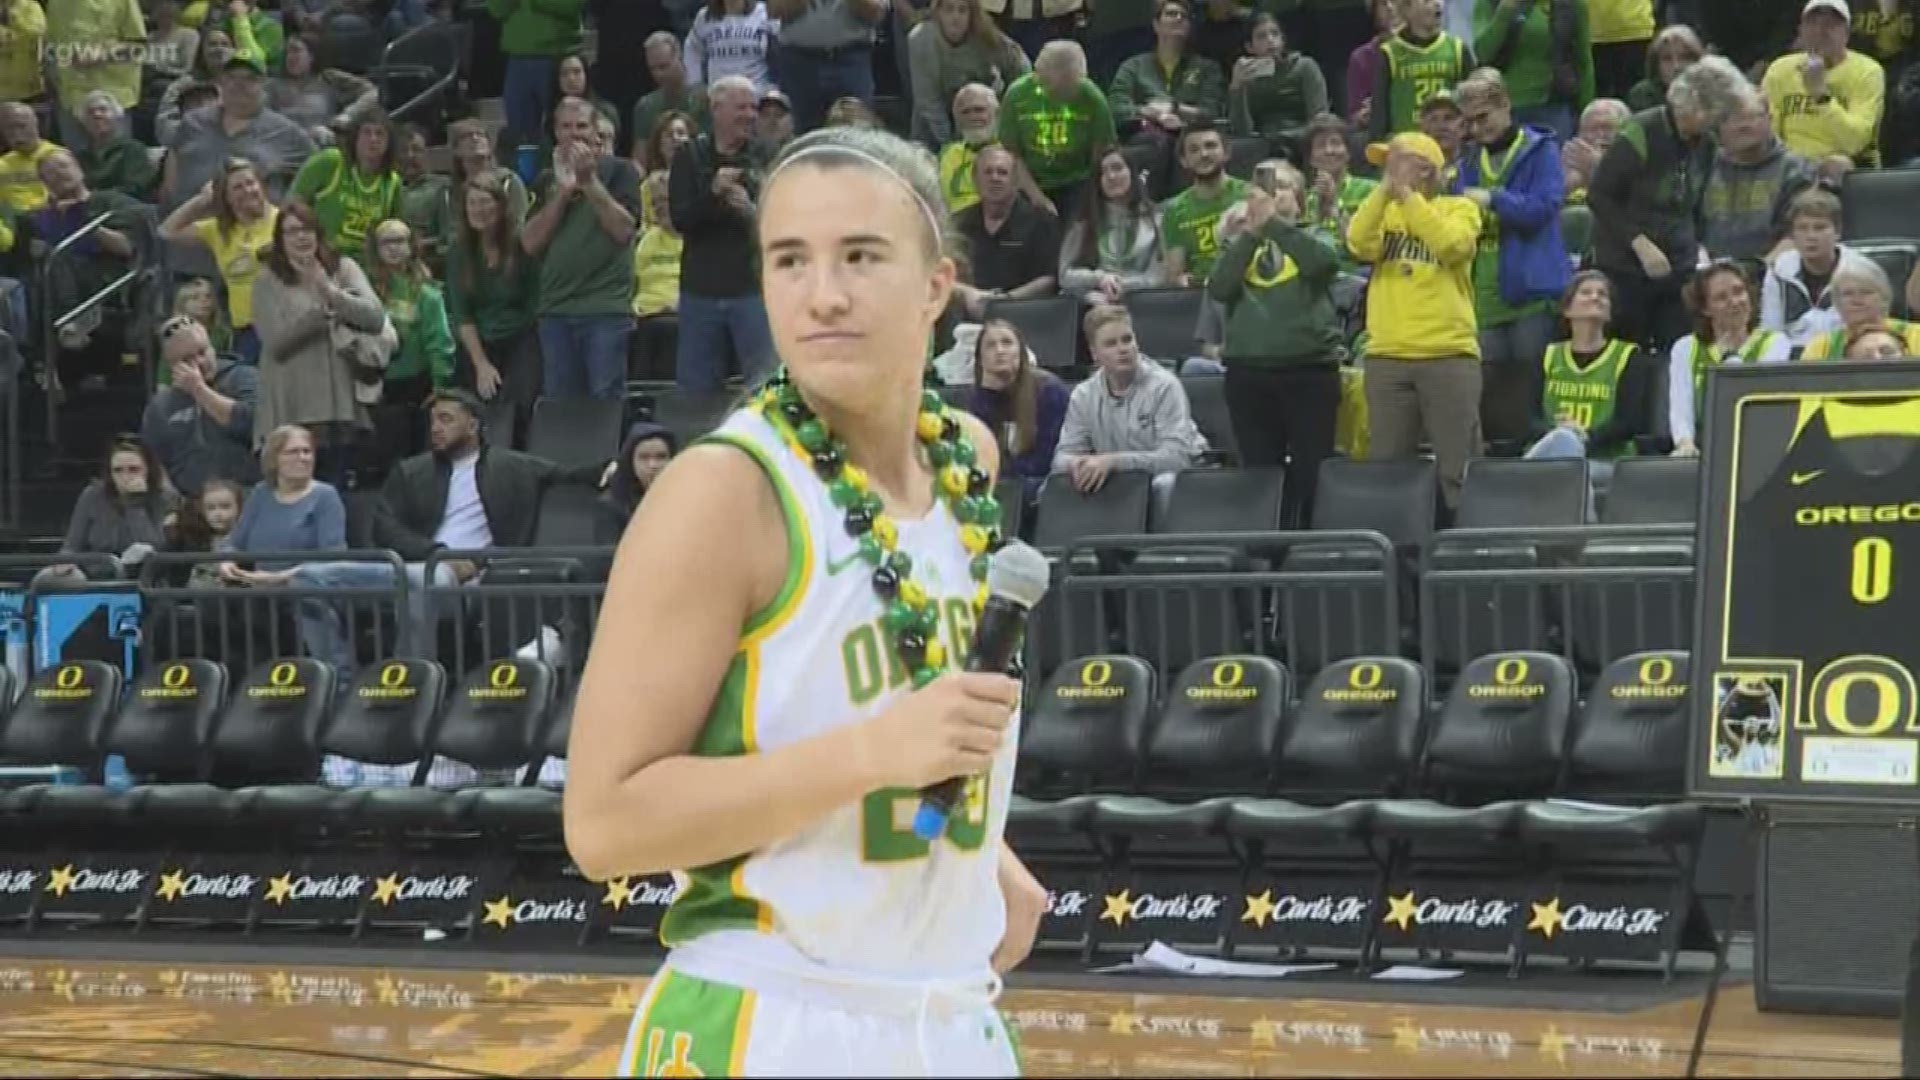 Fans gave Sabrina Ionescu and three other seniors a touching sendoff before the Ducks crushed Washington for an undefeated home season.